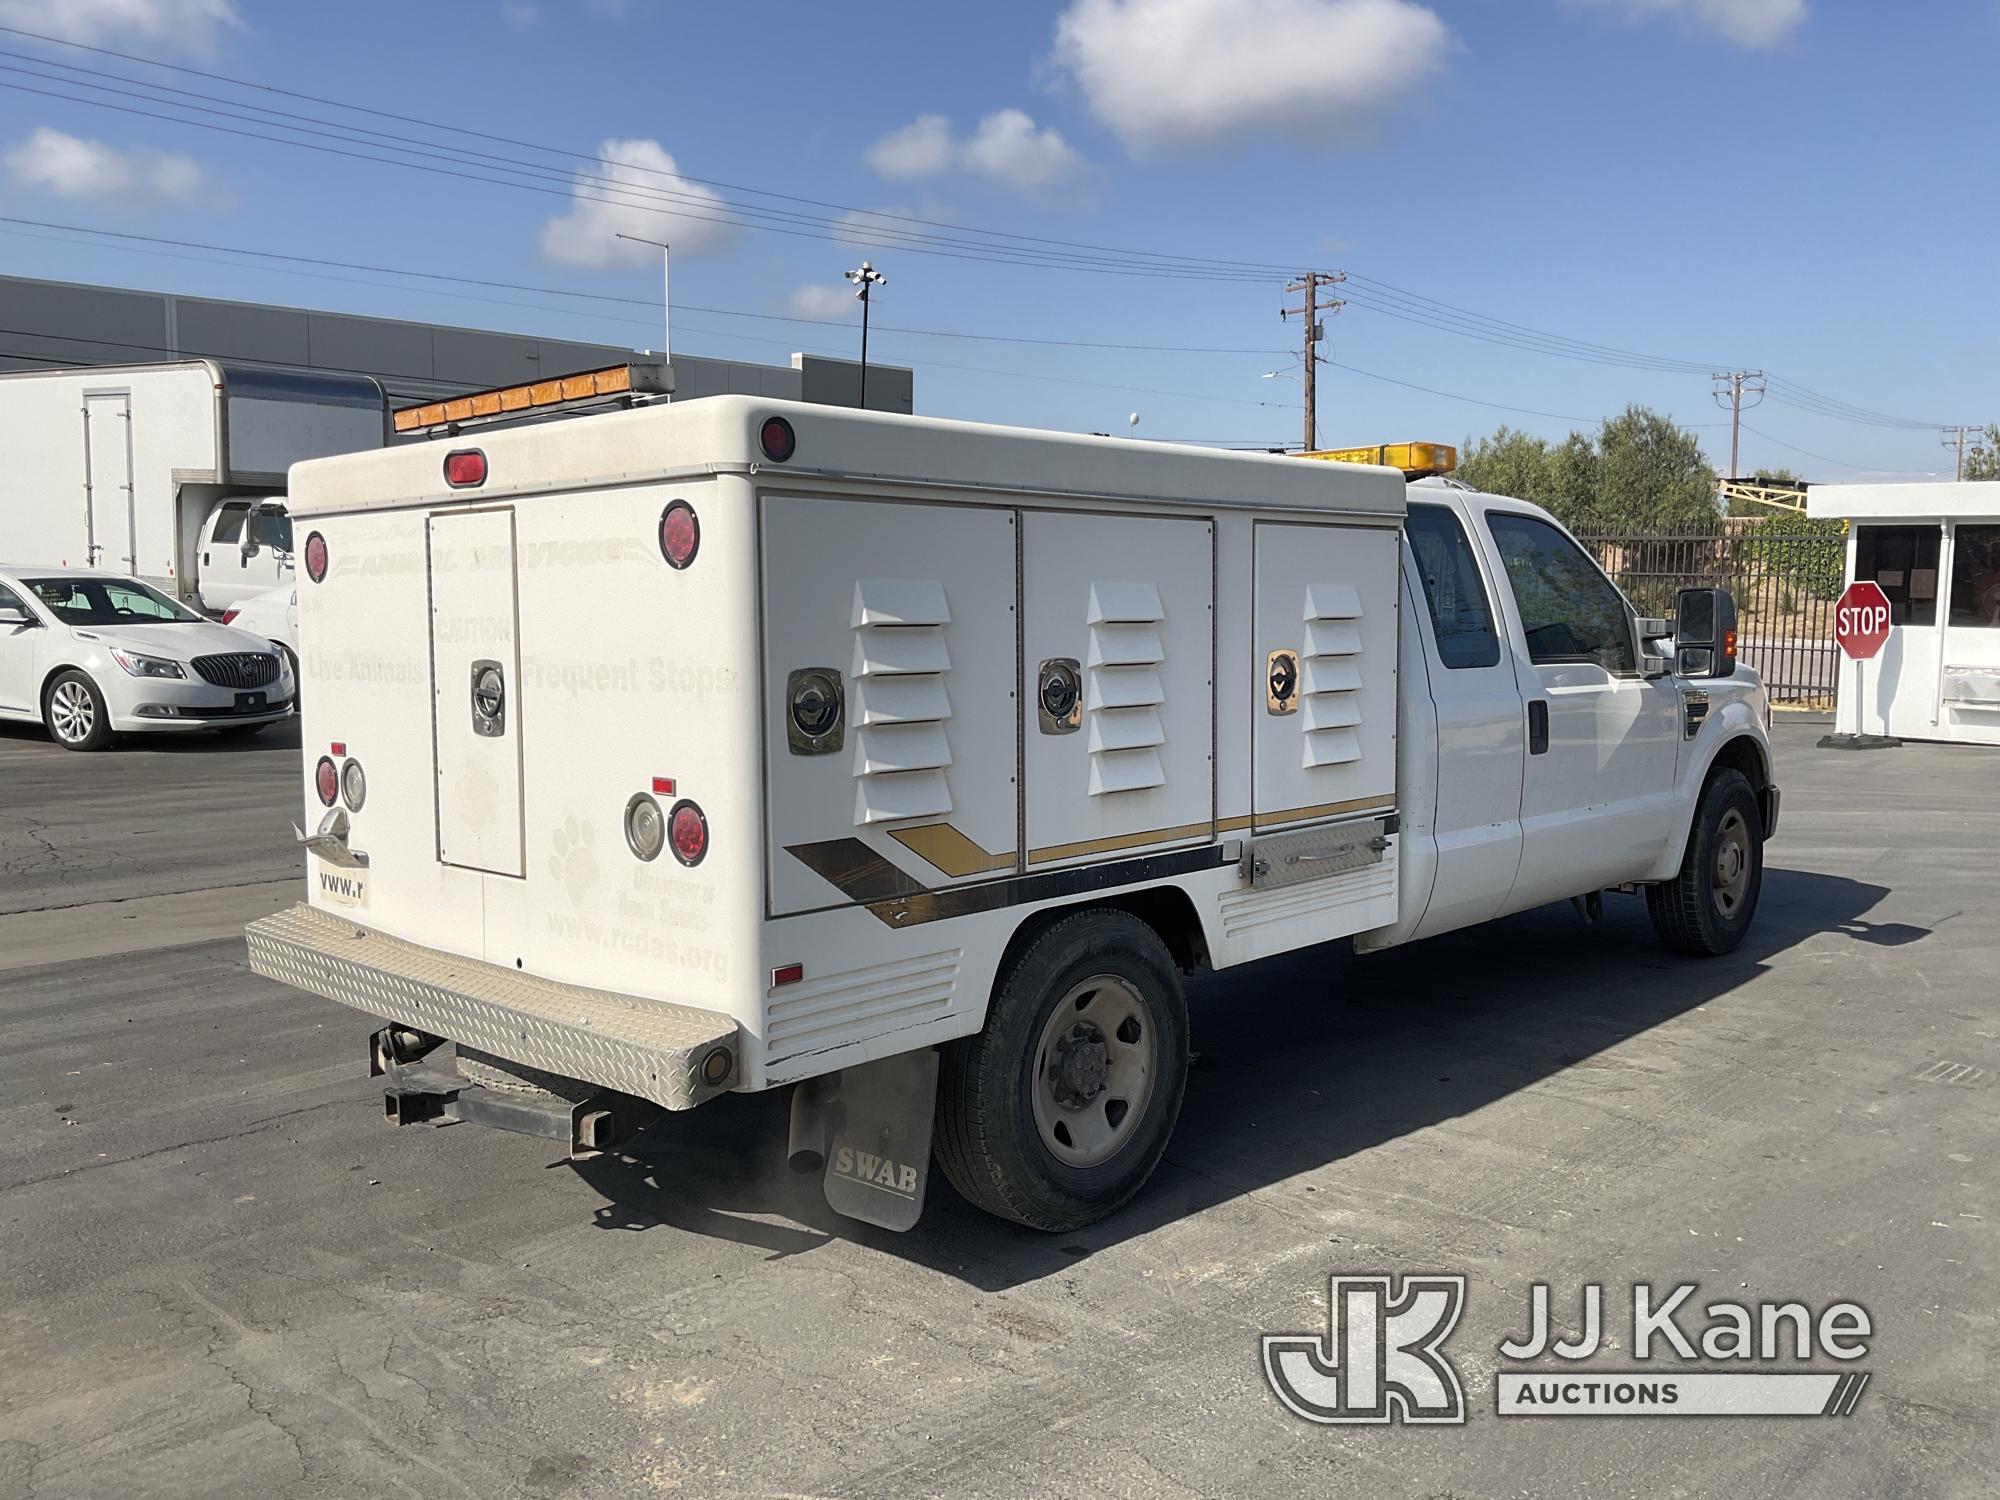 (Jurupa Valley, CA) 2008 Ford F250 XL Cab & Chassis Runs & Moves, Not Clearing Drive Cycle